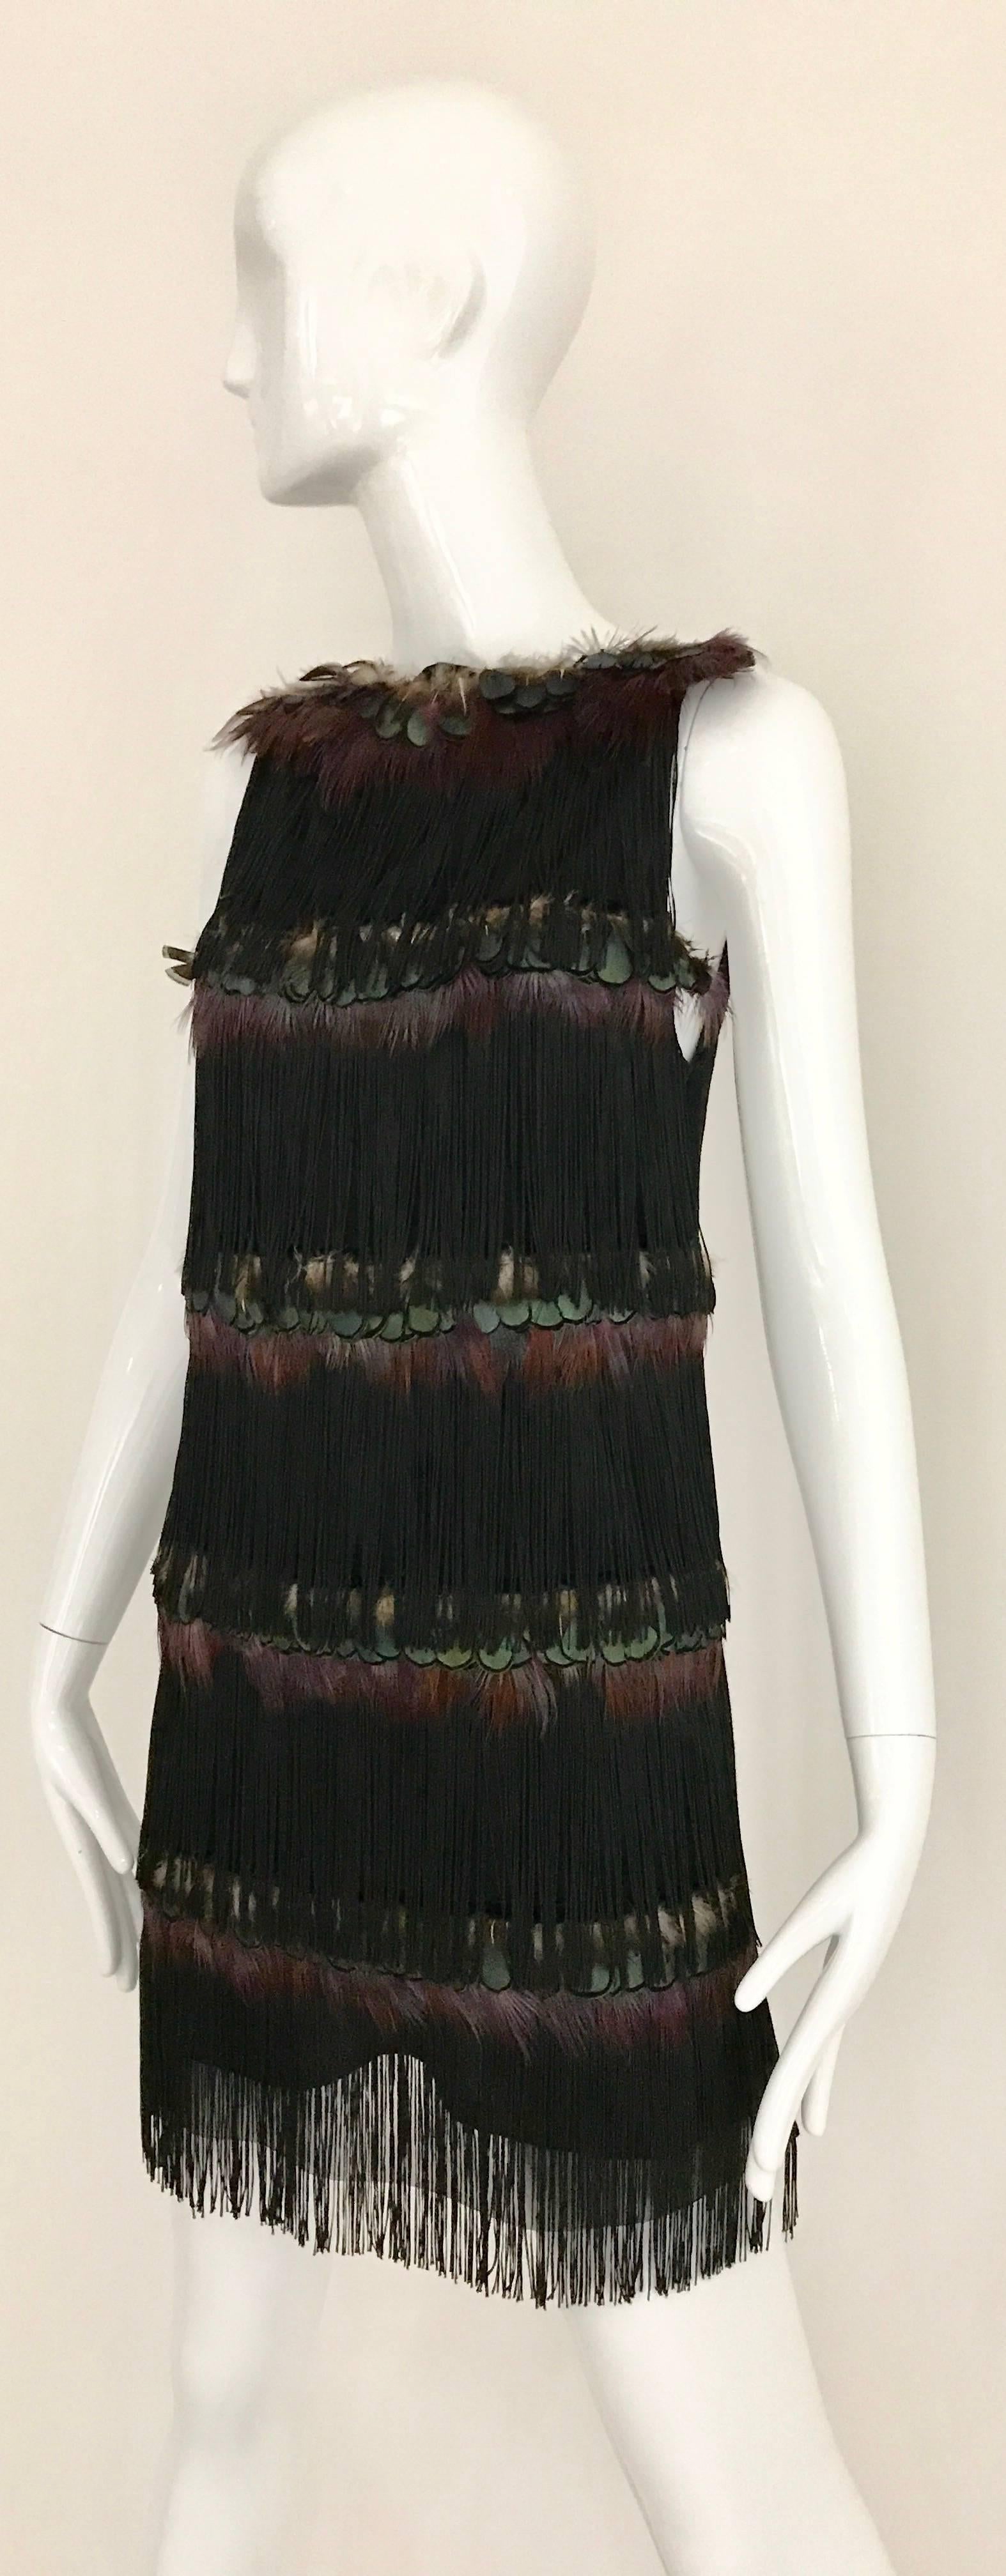 What a fun party Dress from alessandro dell'acqua. Black Dress with Feather peacocks and silk fringe tassel . Zip at the back. 
Size : Small
Bust 34 inch / Waist 30 inch / Hip 32 inch / Length 33.5 inch
**** This Garment has been professionally Dry